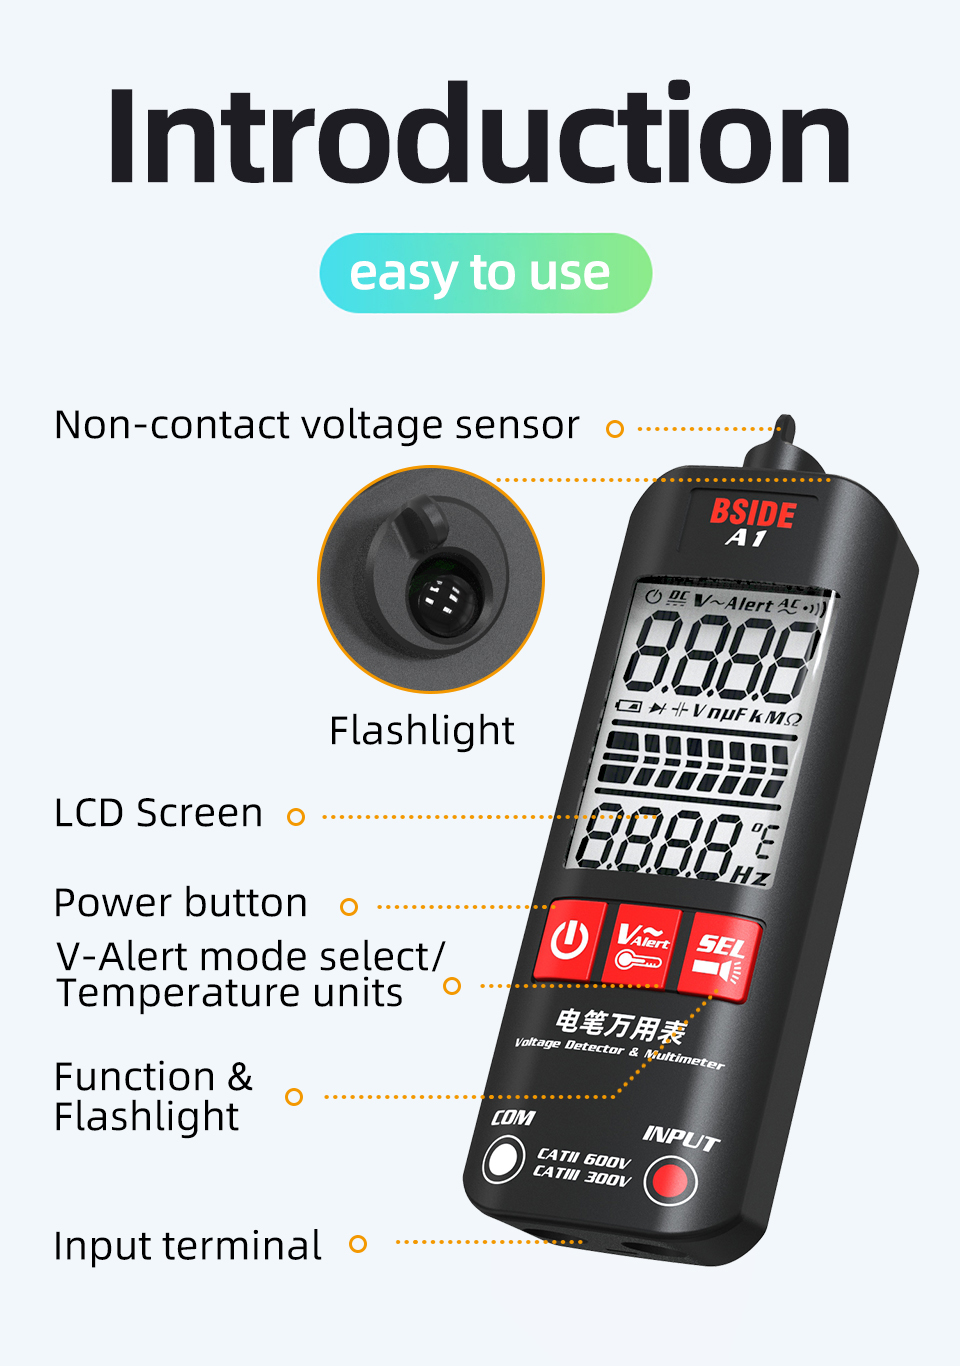 BSIDE-A1-Dual-mode-Smart-True-RMS-Multimeter-Non-contact-AC-DC-Voltage-Tester-with-Flashlight-1959310-5